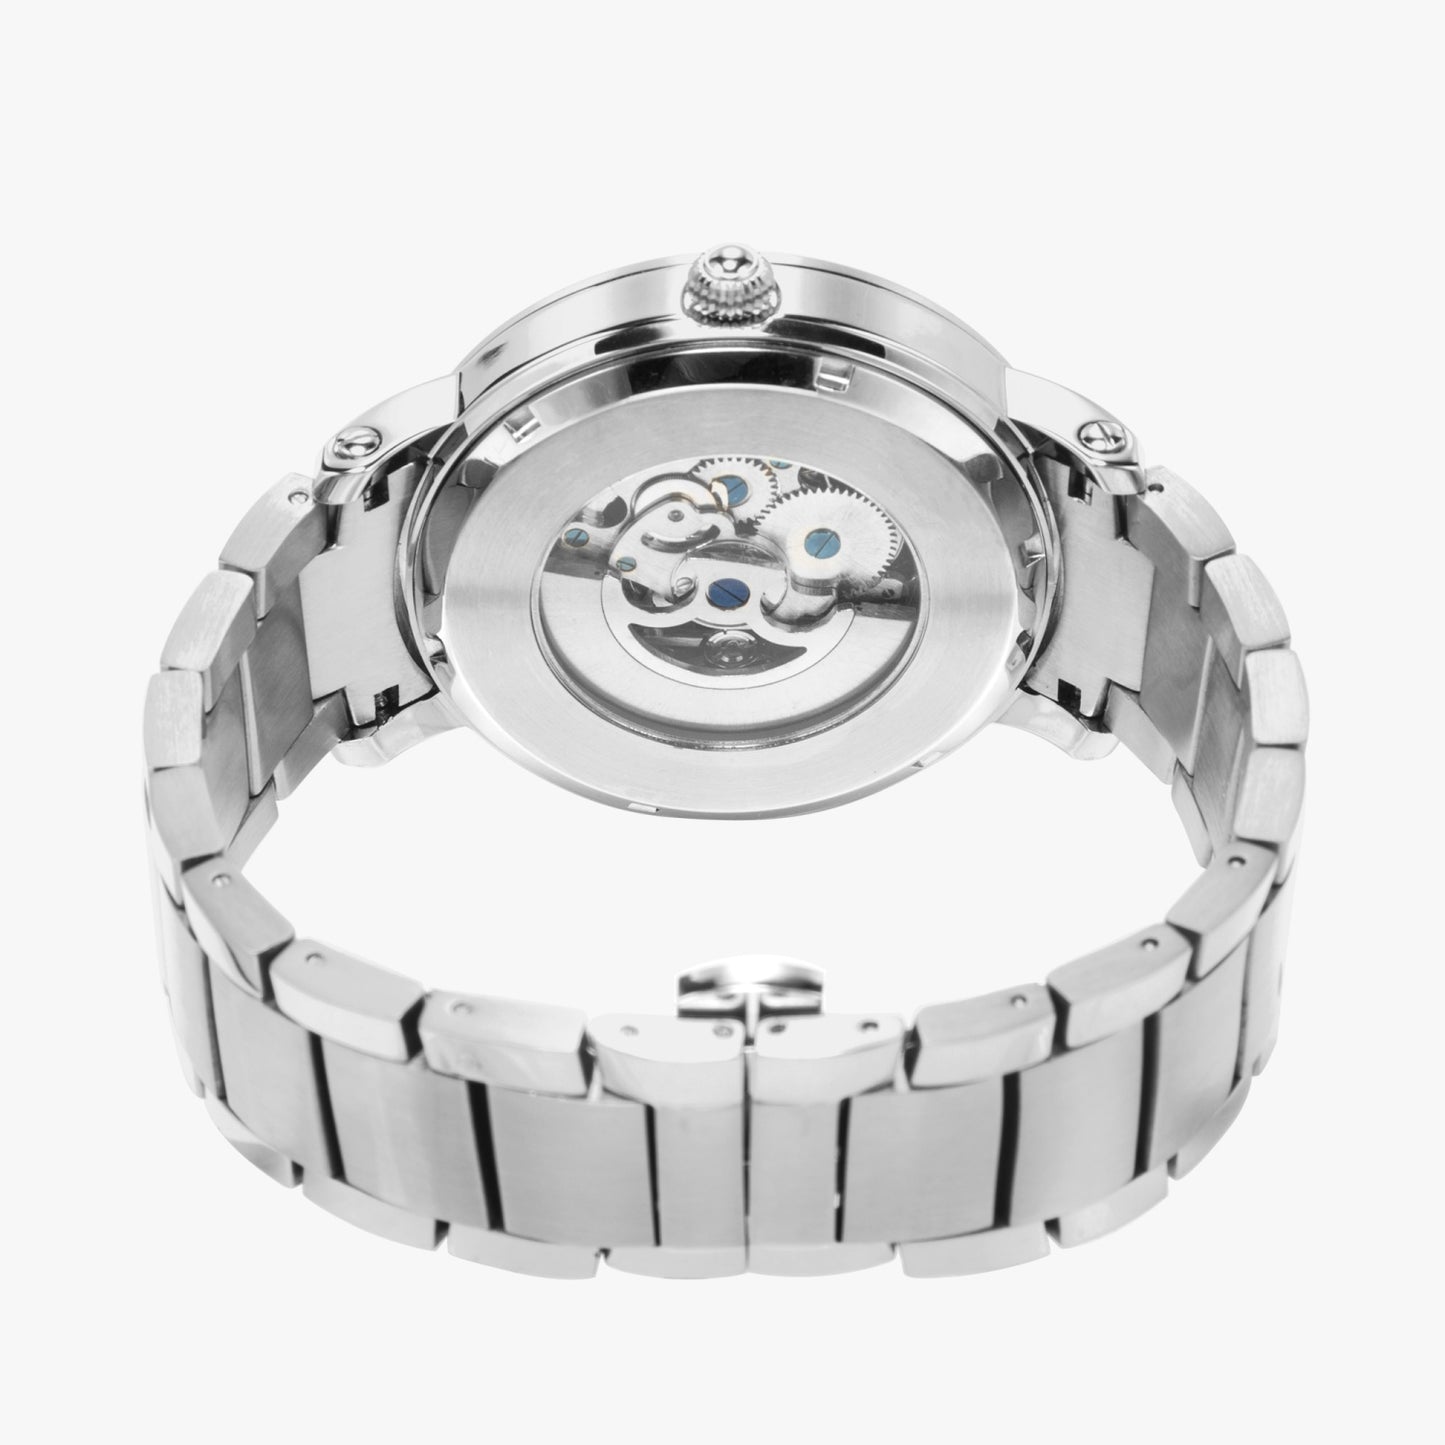 Automatic watch with steel bracelet "Luciole" (with indicators)